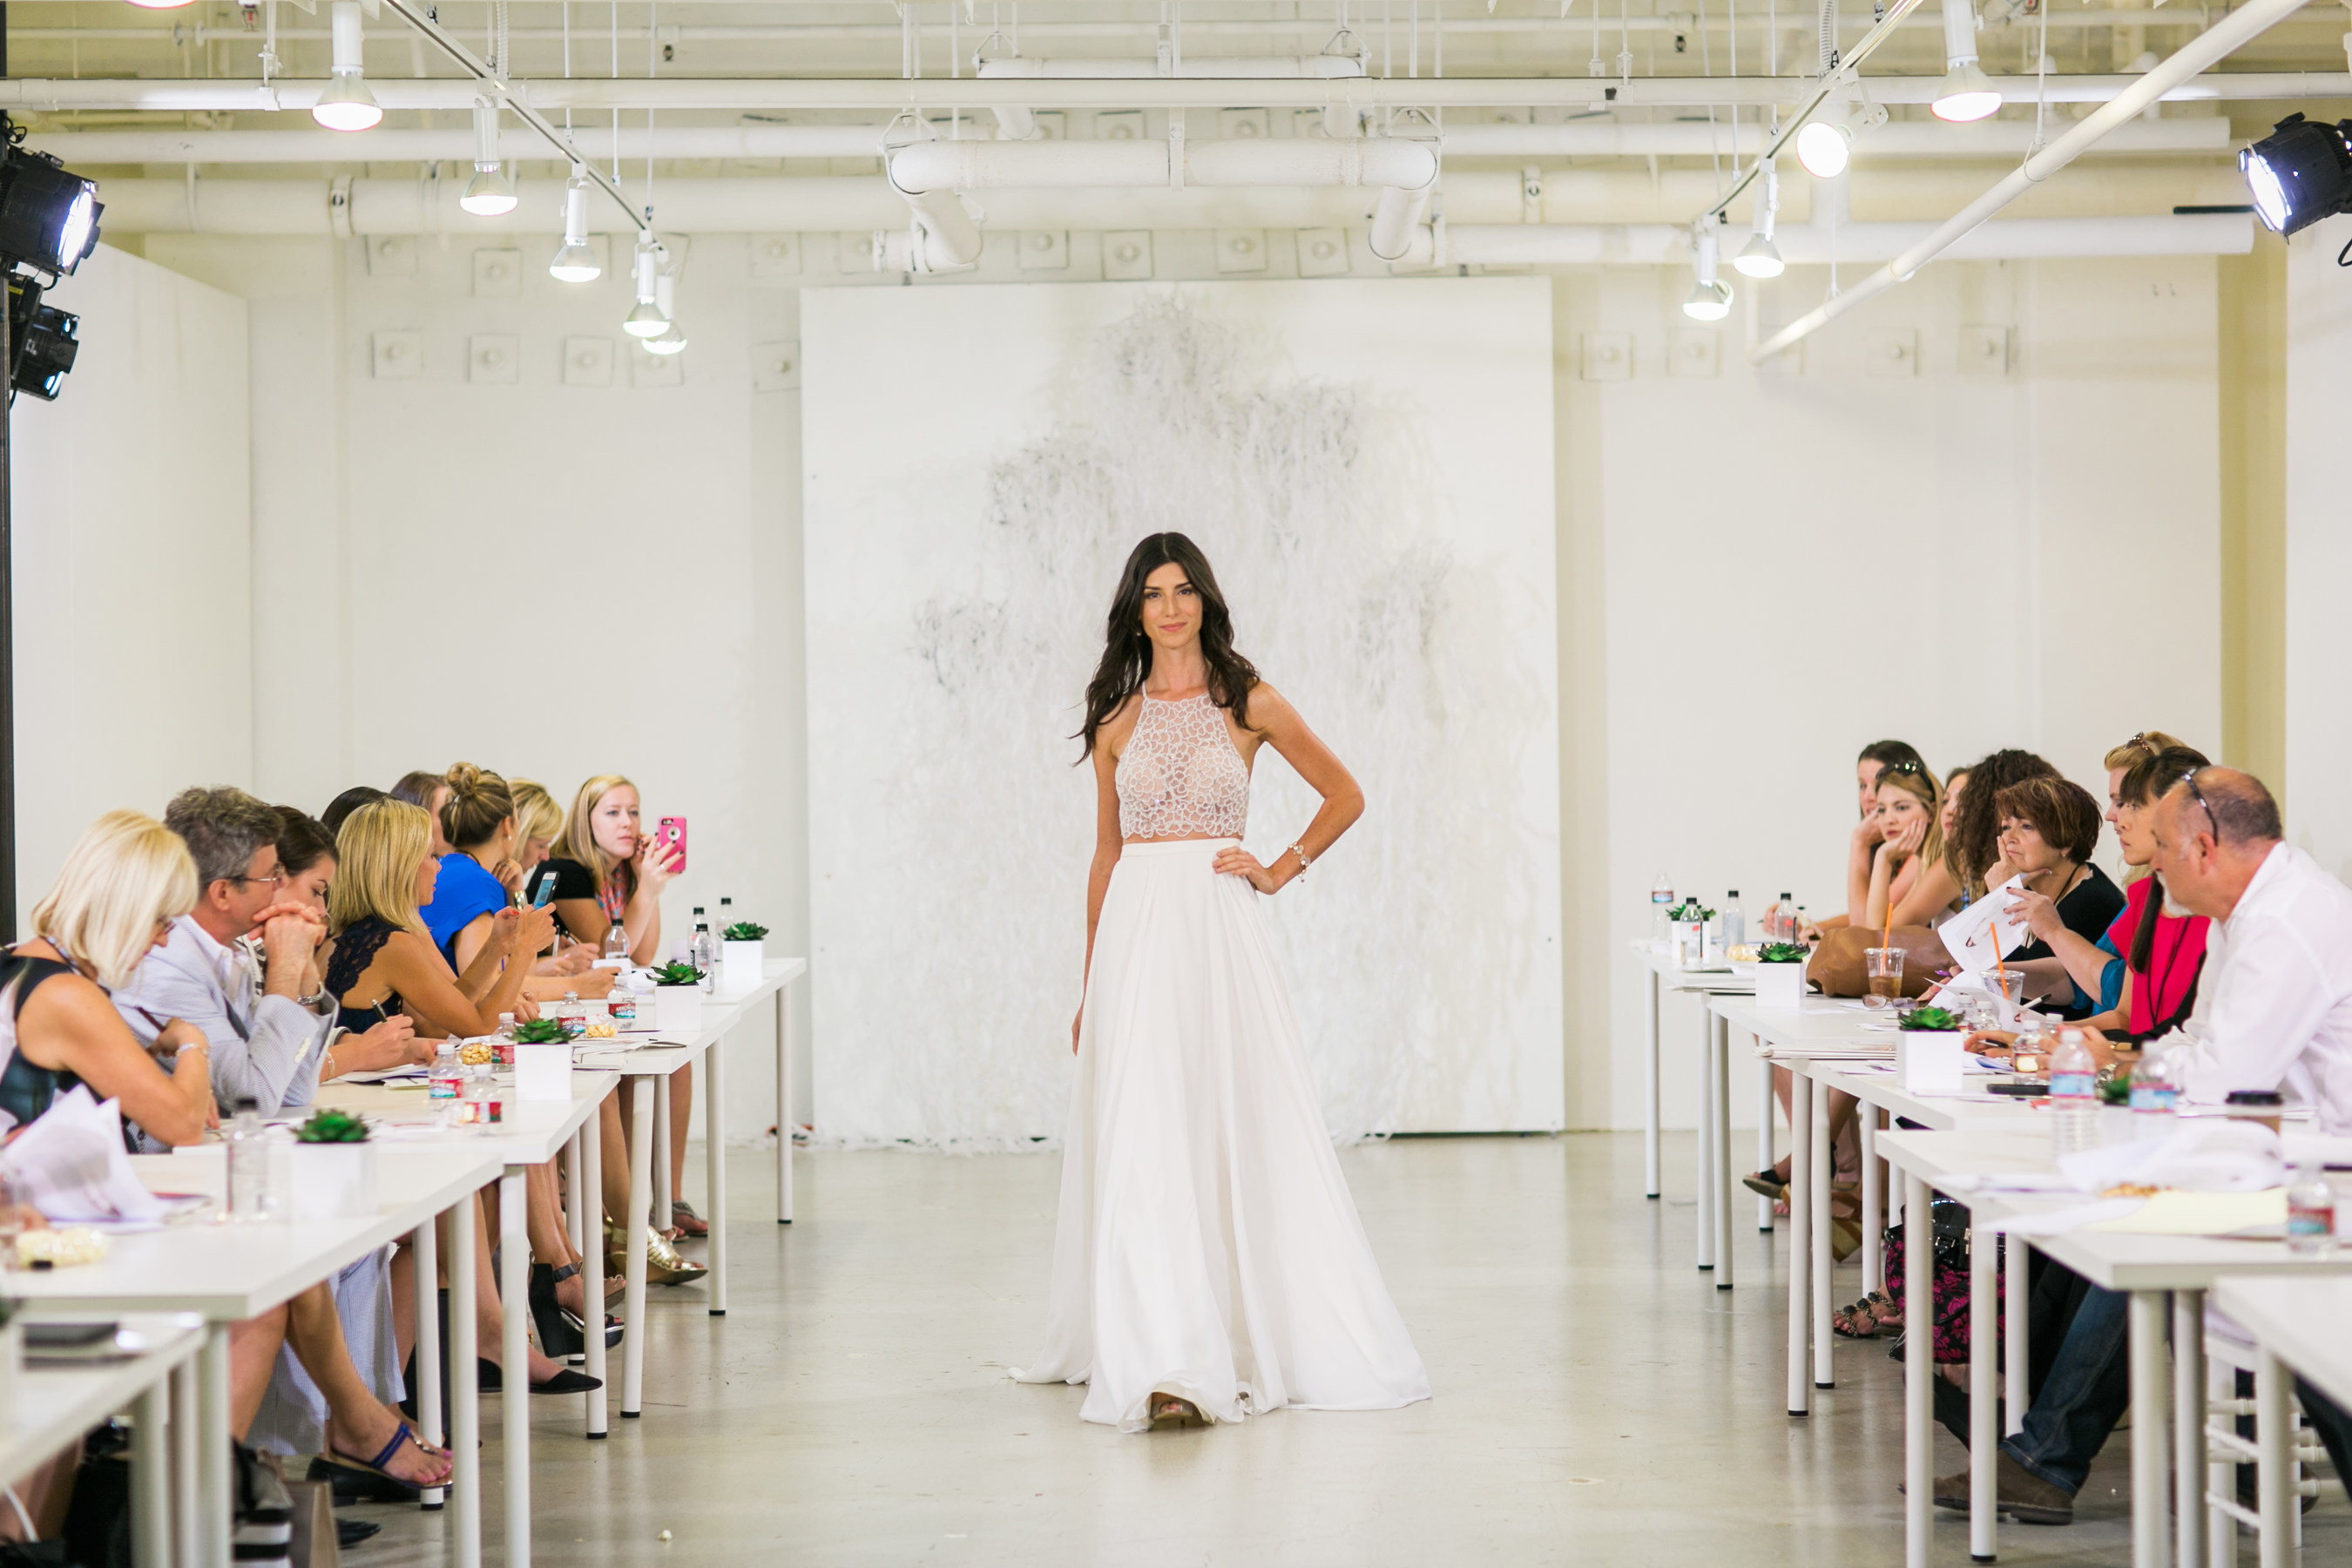 COUTURE: Los Angeles Bridal Market. Photo: Valorie Darling Photography